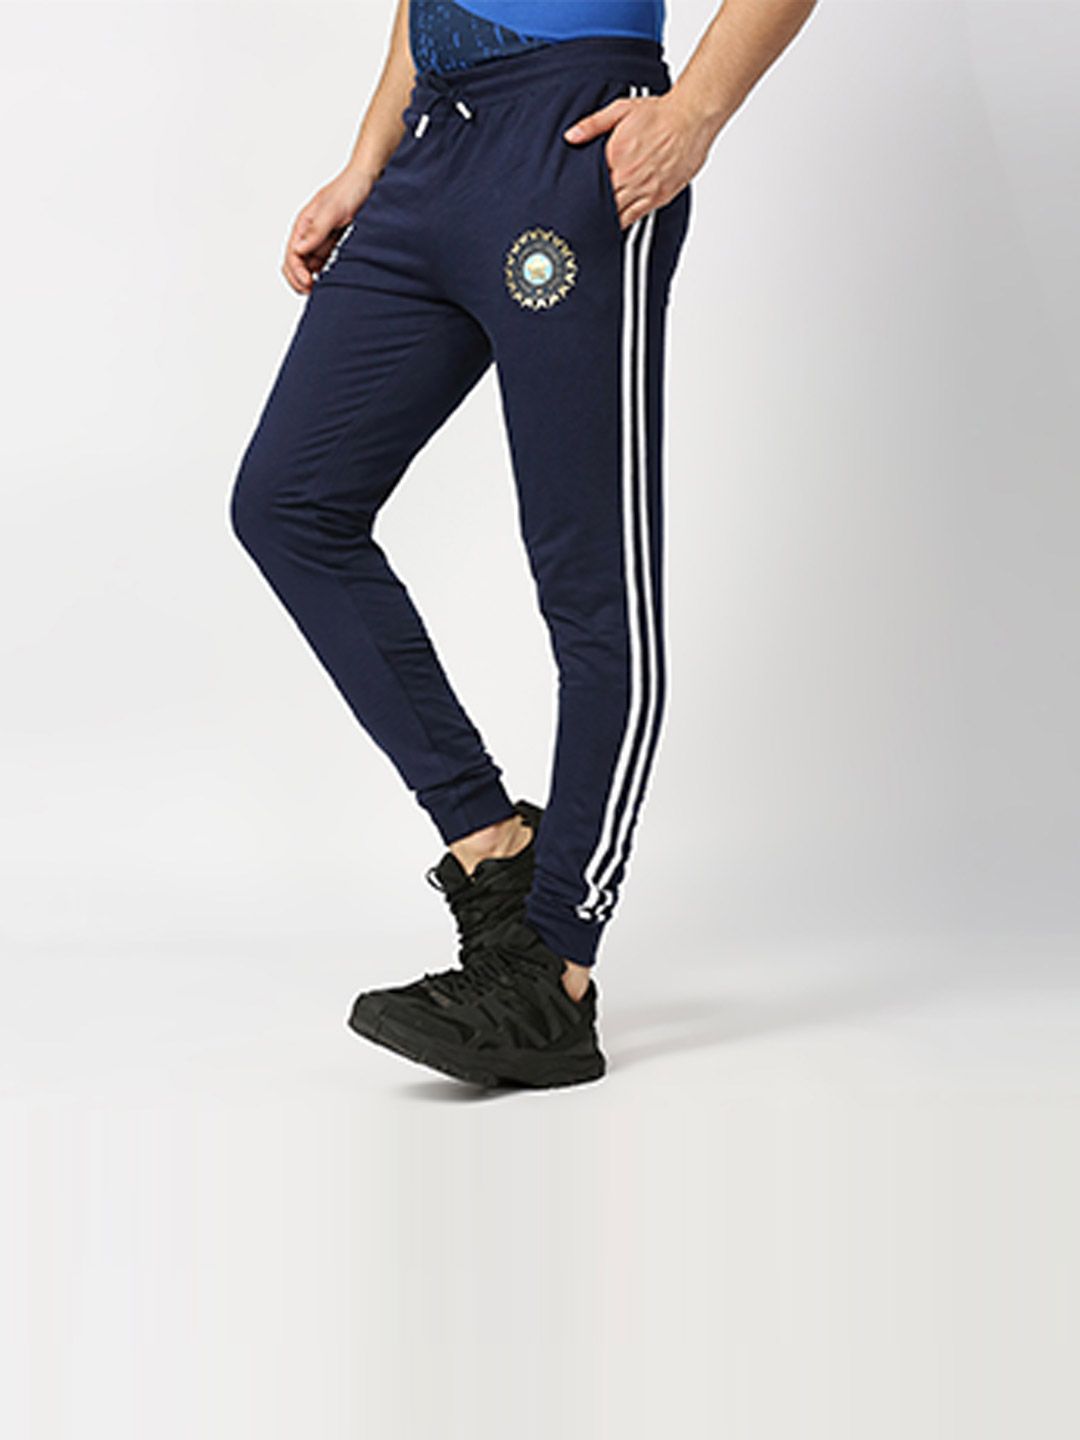 AFC Ajax x adidas Woven Track Pant  Where To Buy  H37573  The Sole  Supplier